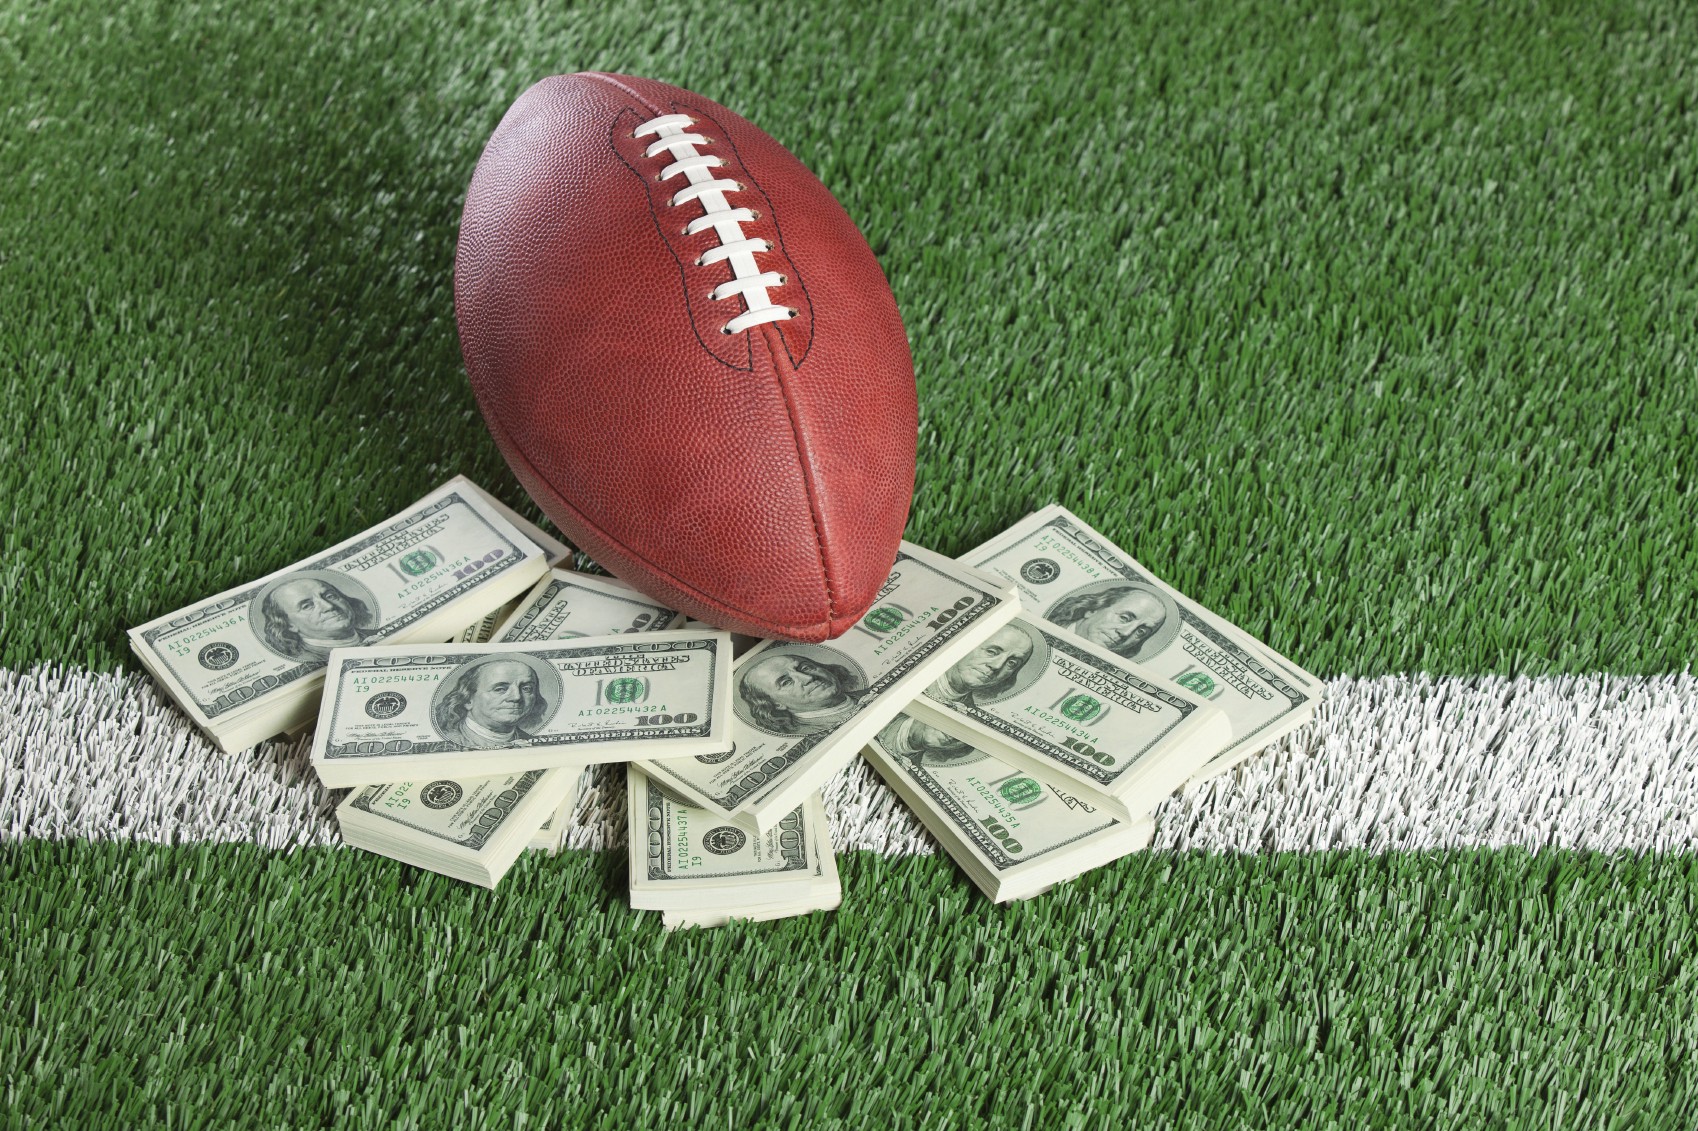 Get in the game with online sports betting